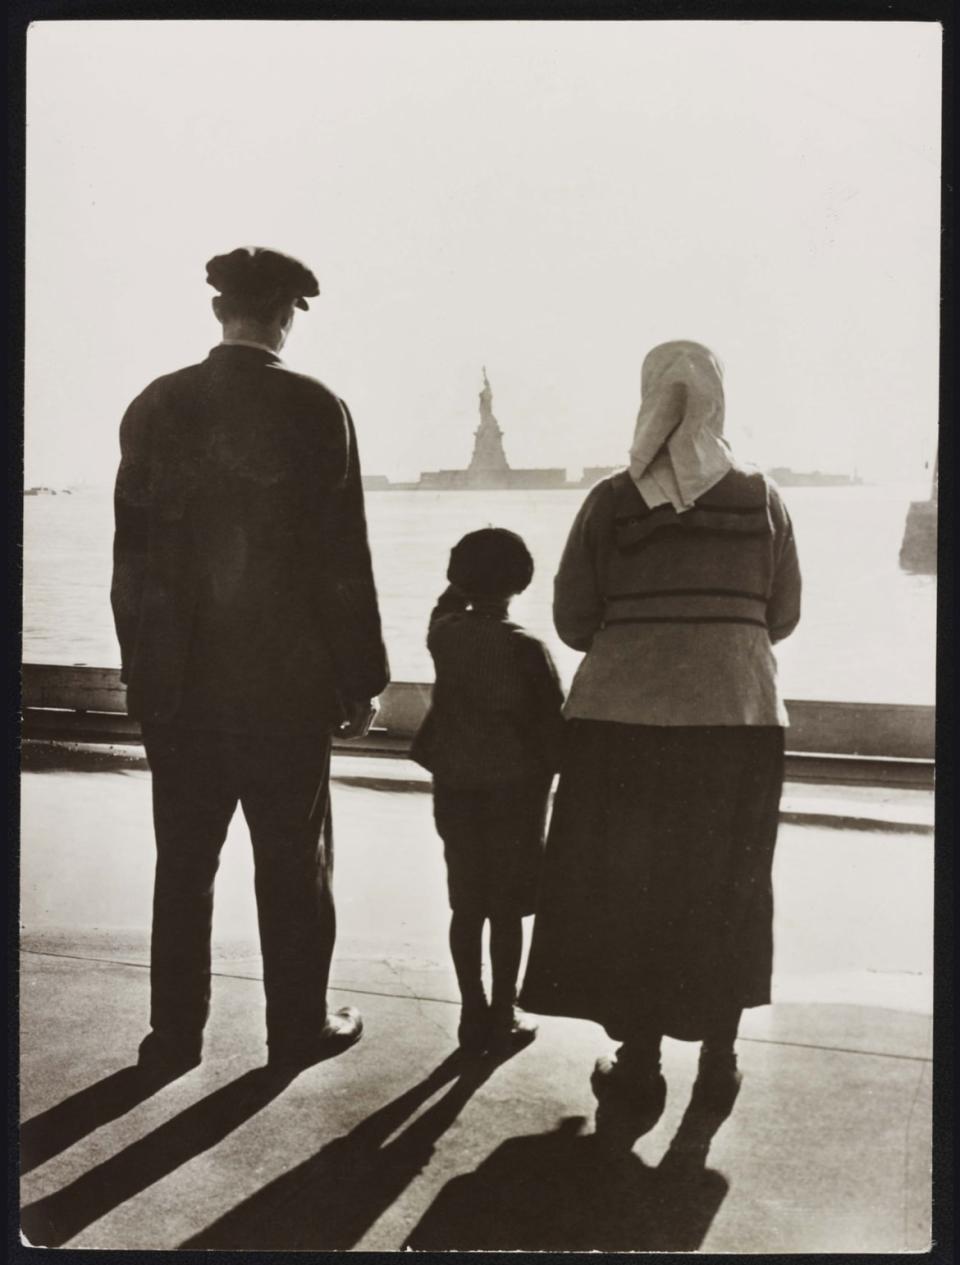 <div class="inline-image__caption"><p>The Statue of Liberty seen from Ellis Island.</p></div> <div class="inline-image__credit">Courtesy of the Library of Congress</div>